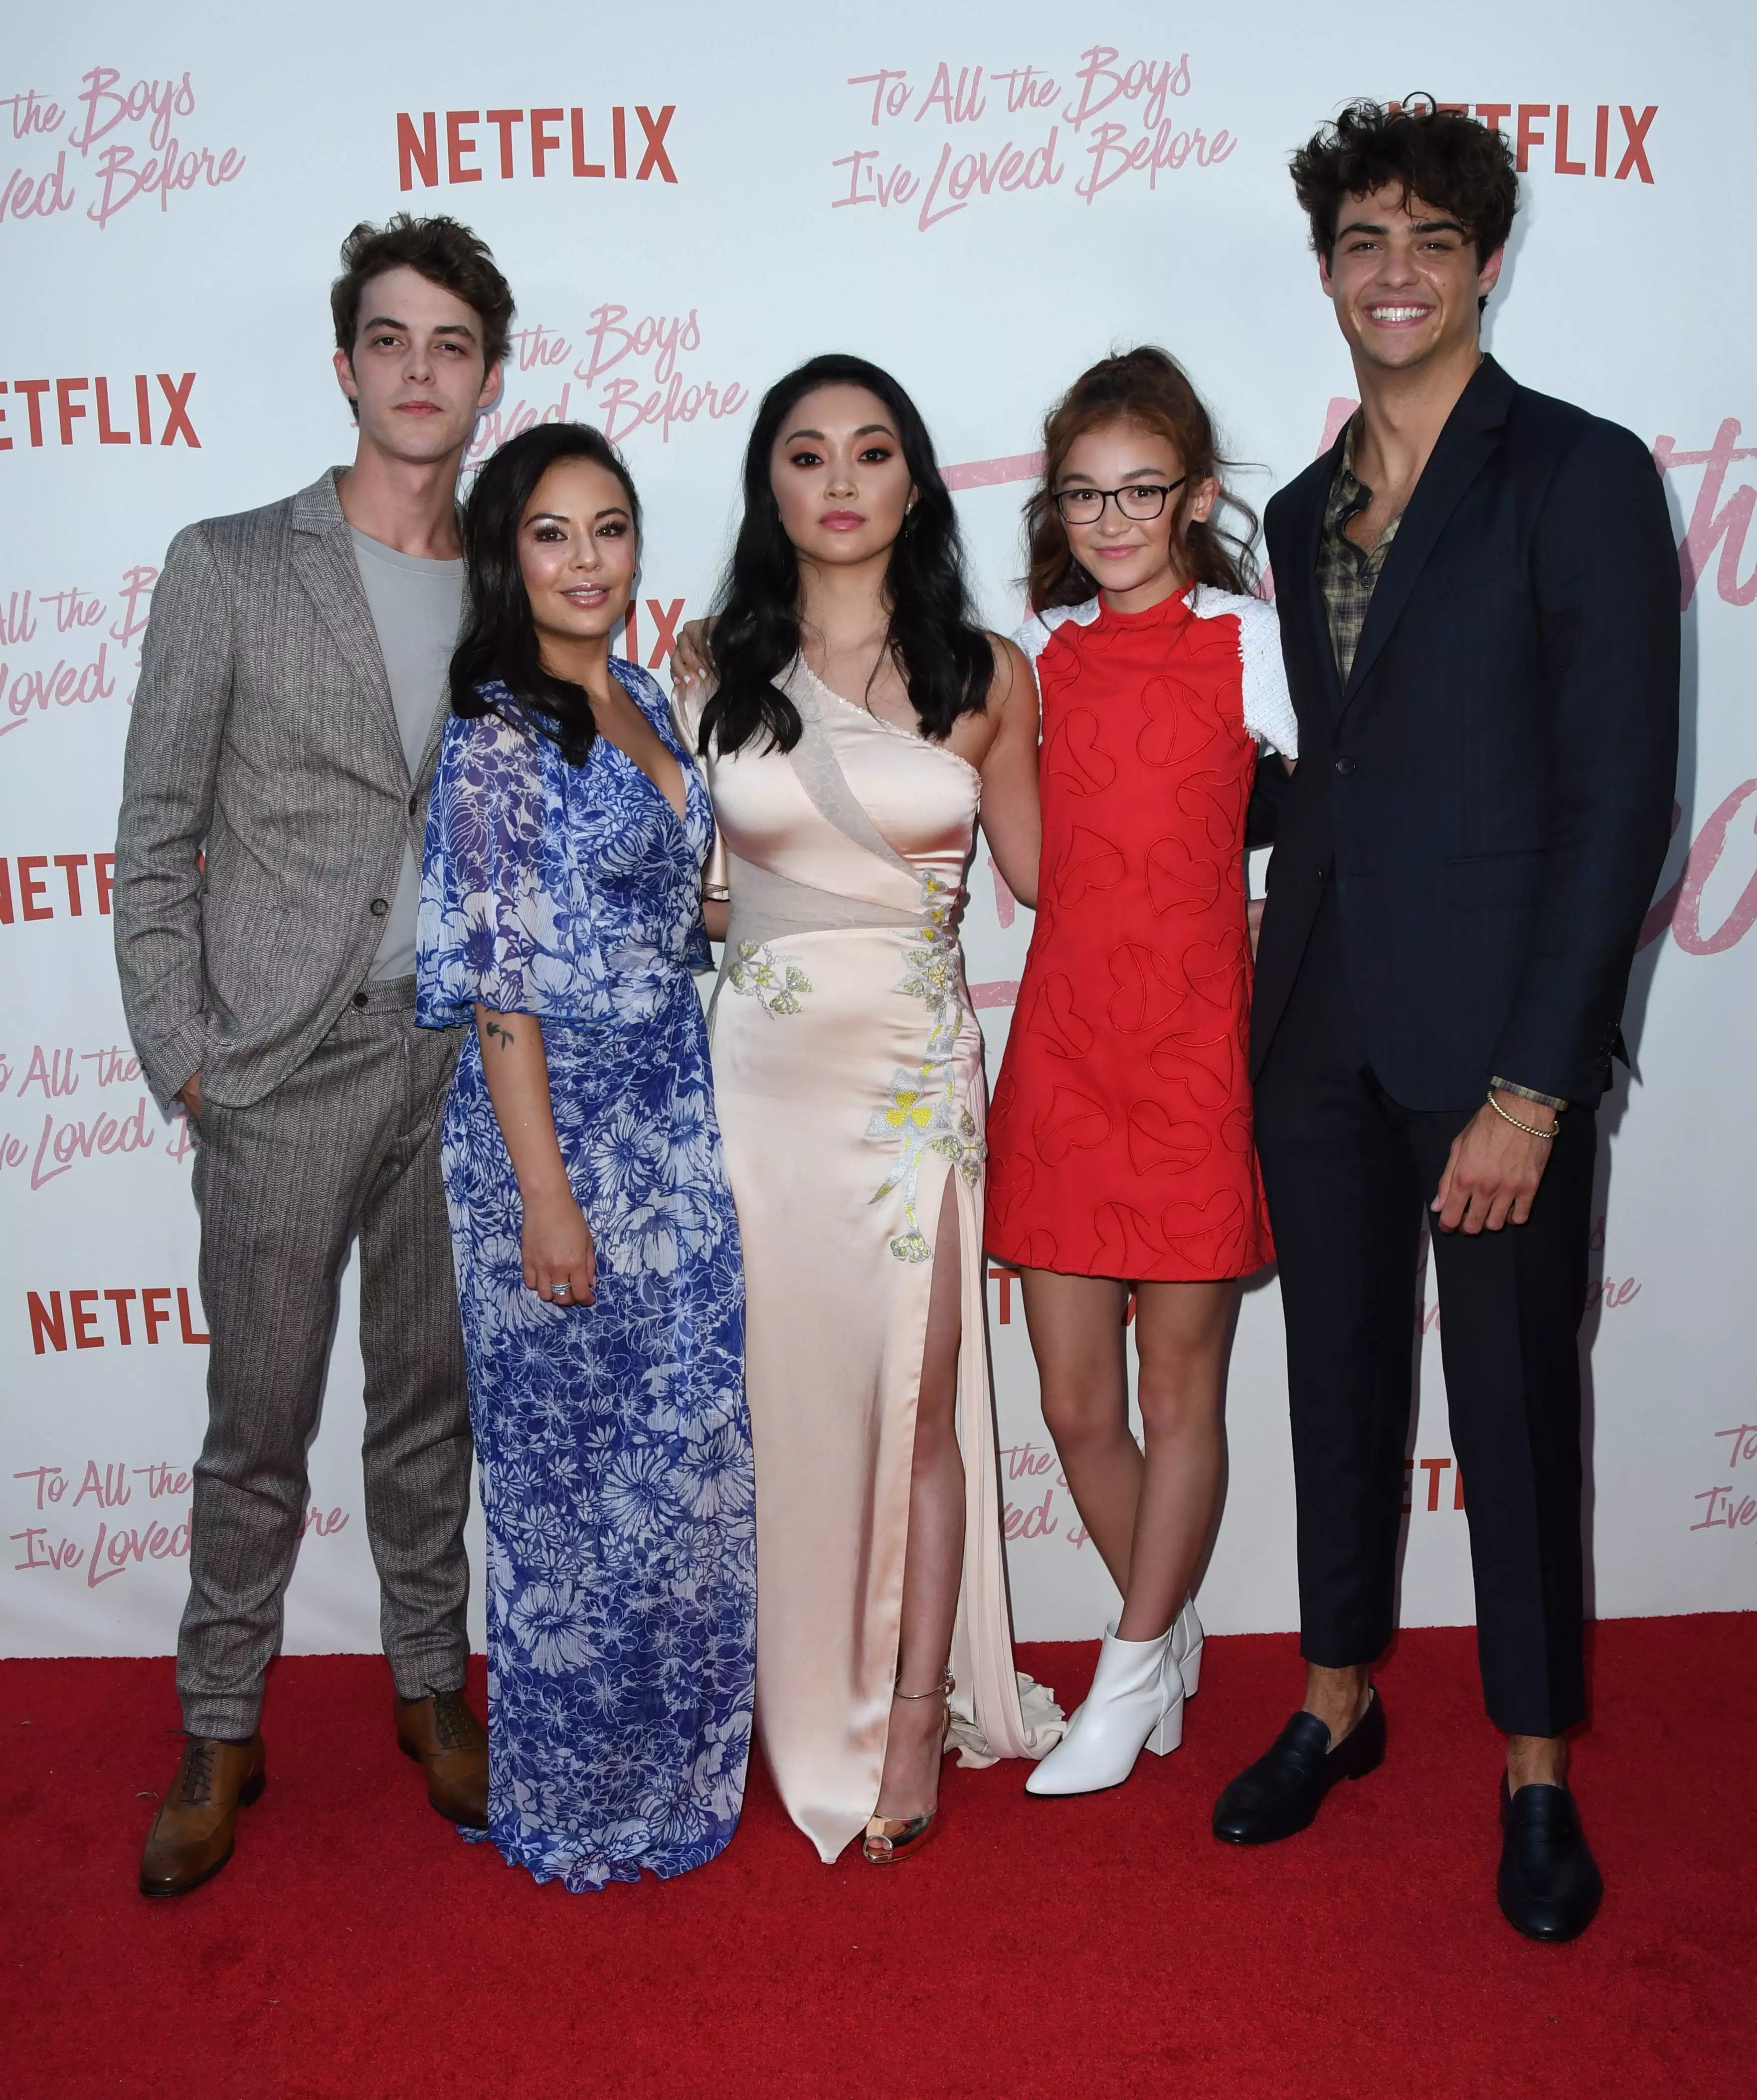 The cast of 'To All The Boys I've Loved Before'.